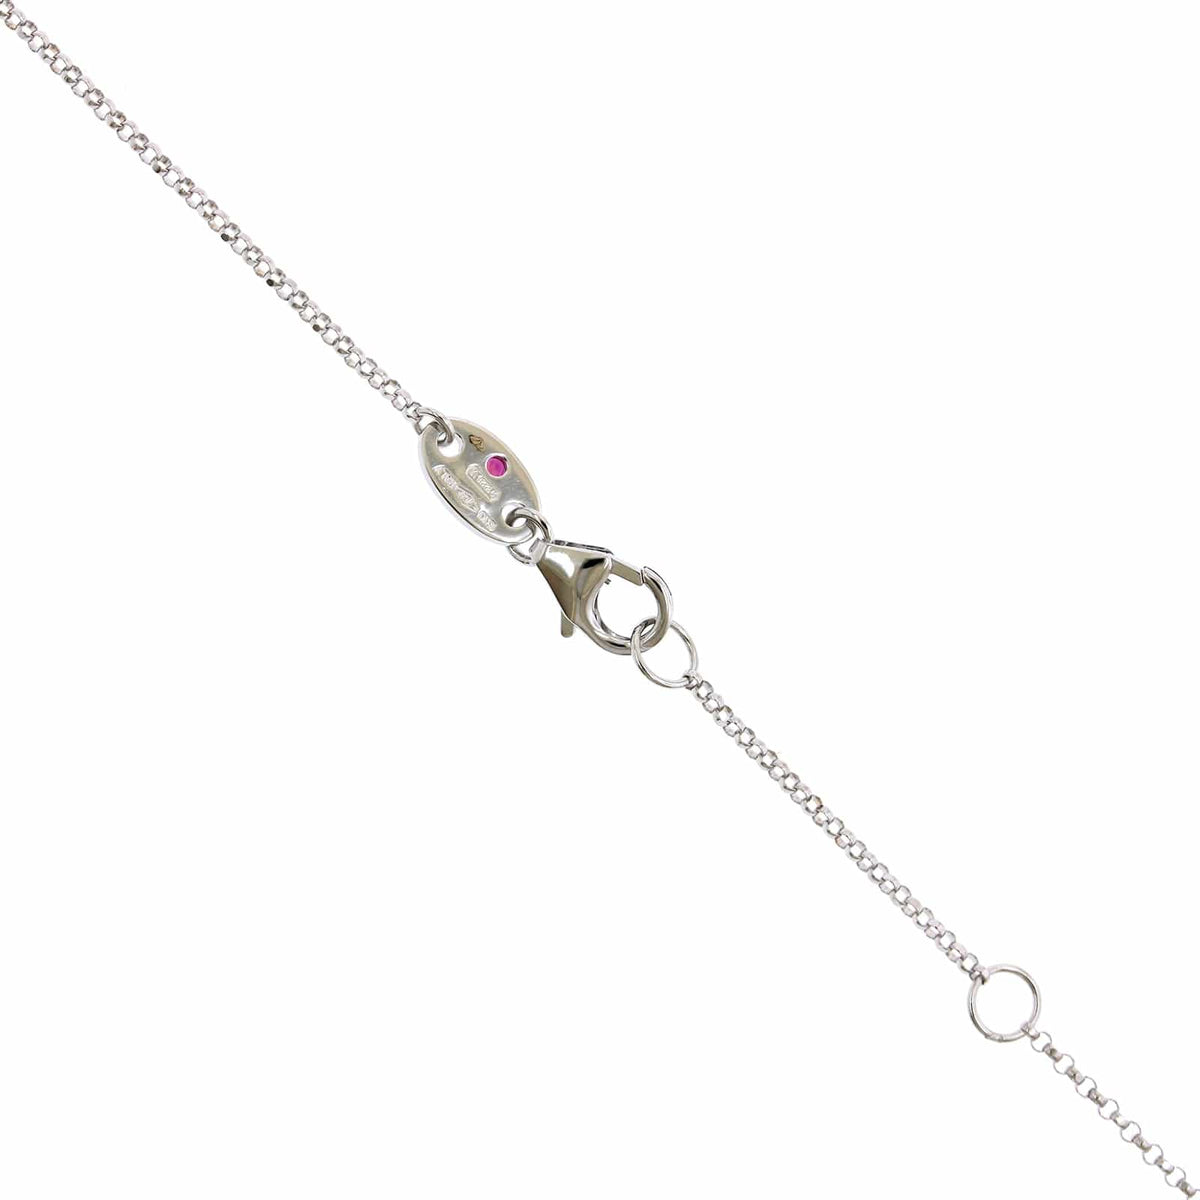 Roberto Coin 18K White Gold 5 Station "Love by The Inch" Diamond Necklace